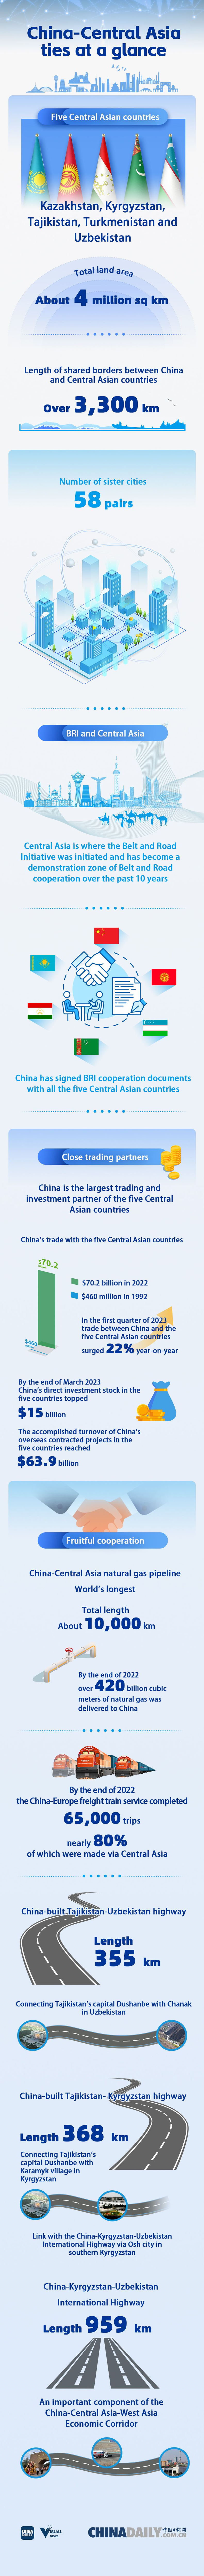 Infographic: China-Central Asia ties at a glance